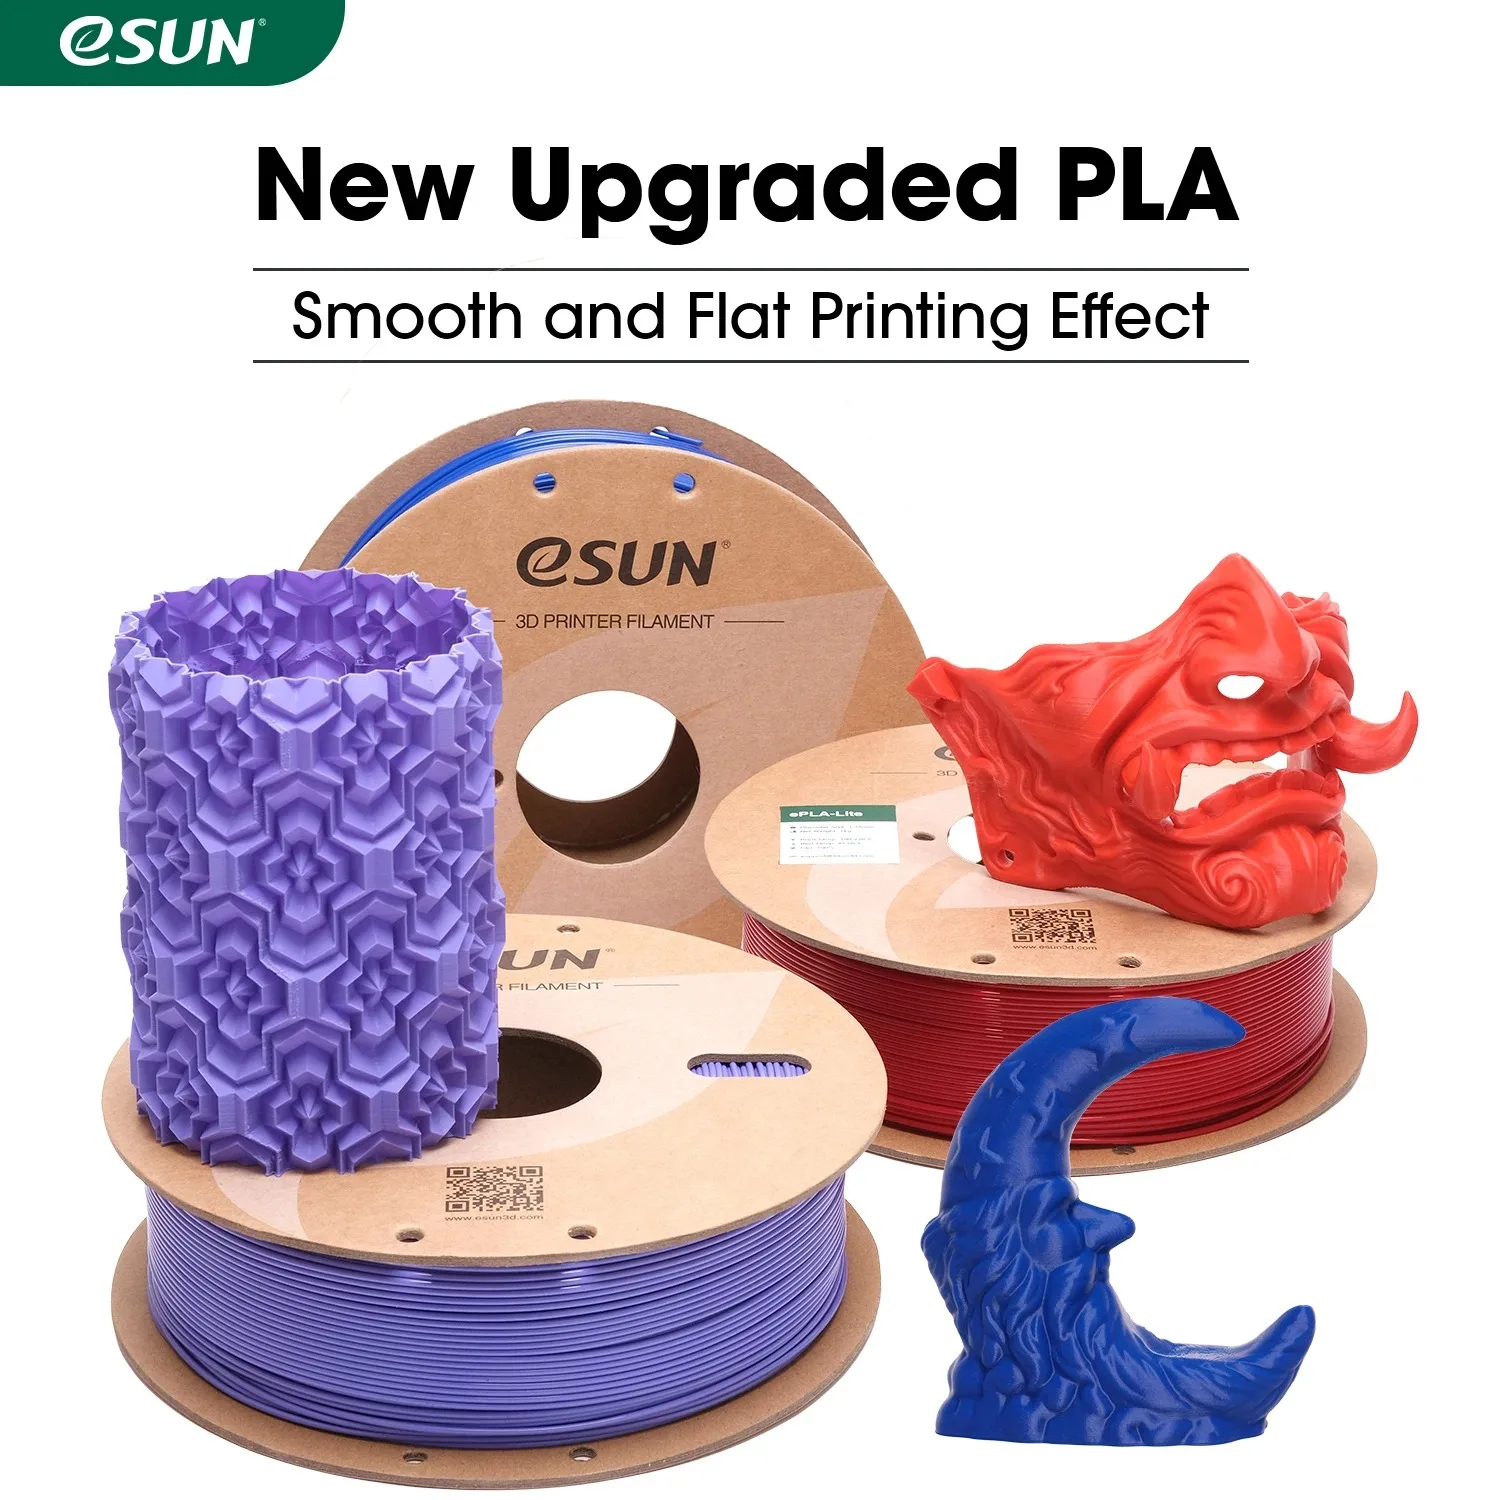 eSUN Fast Printing PLA Filament For 3D Printer 1.75mm 3D Printer Filament 1KG (2.2 LBS) Spool 3D Upgraded PLA For Bambu Lab sunlu wood 1 75mm 1kg spool 2 2 lbs real wood texture effect made of wood fiber different from color effect eco friendly